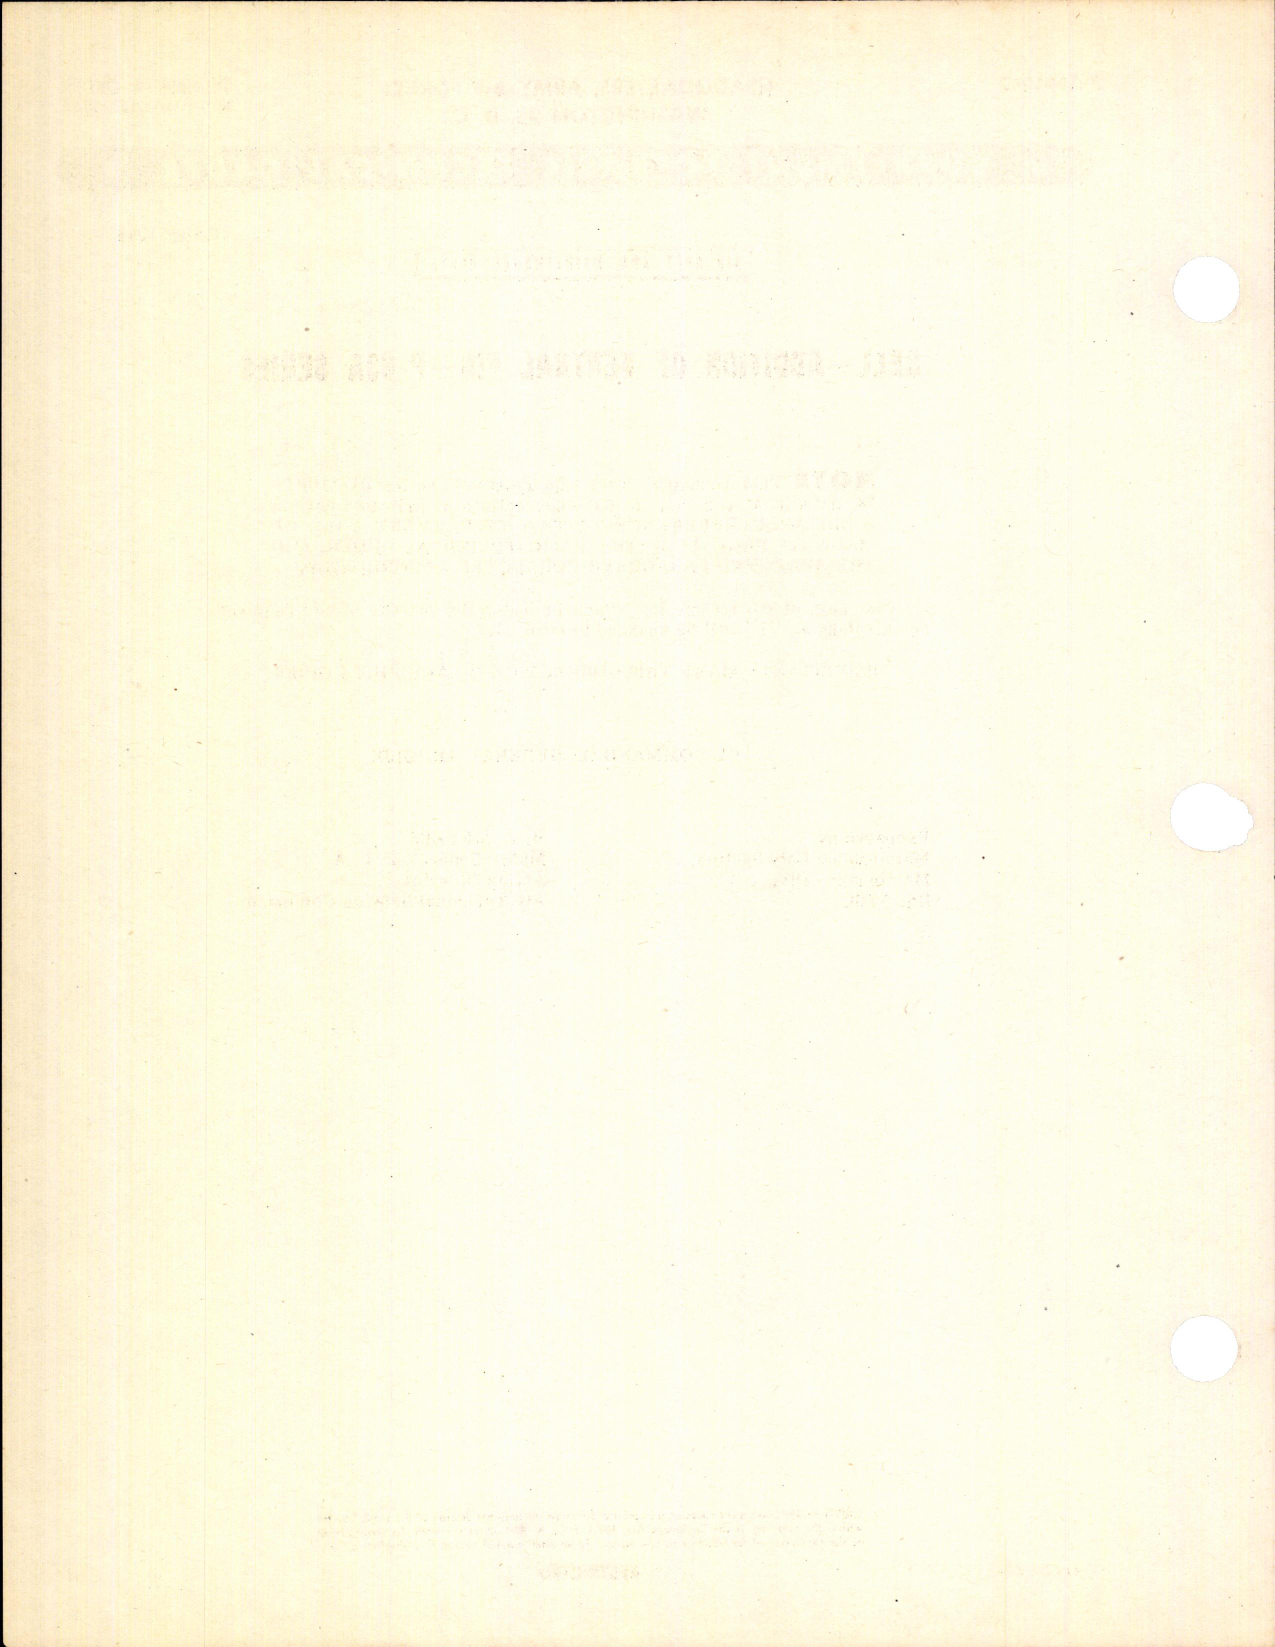 Sample page 2 from AirCorps Library document: Addition of Ventral Fin for P-63A Series